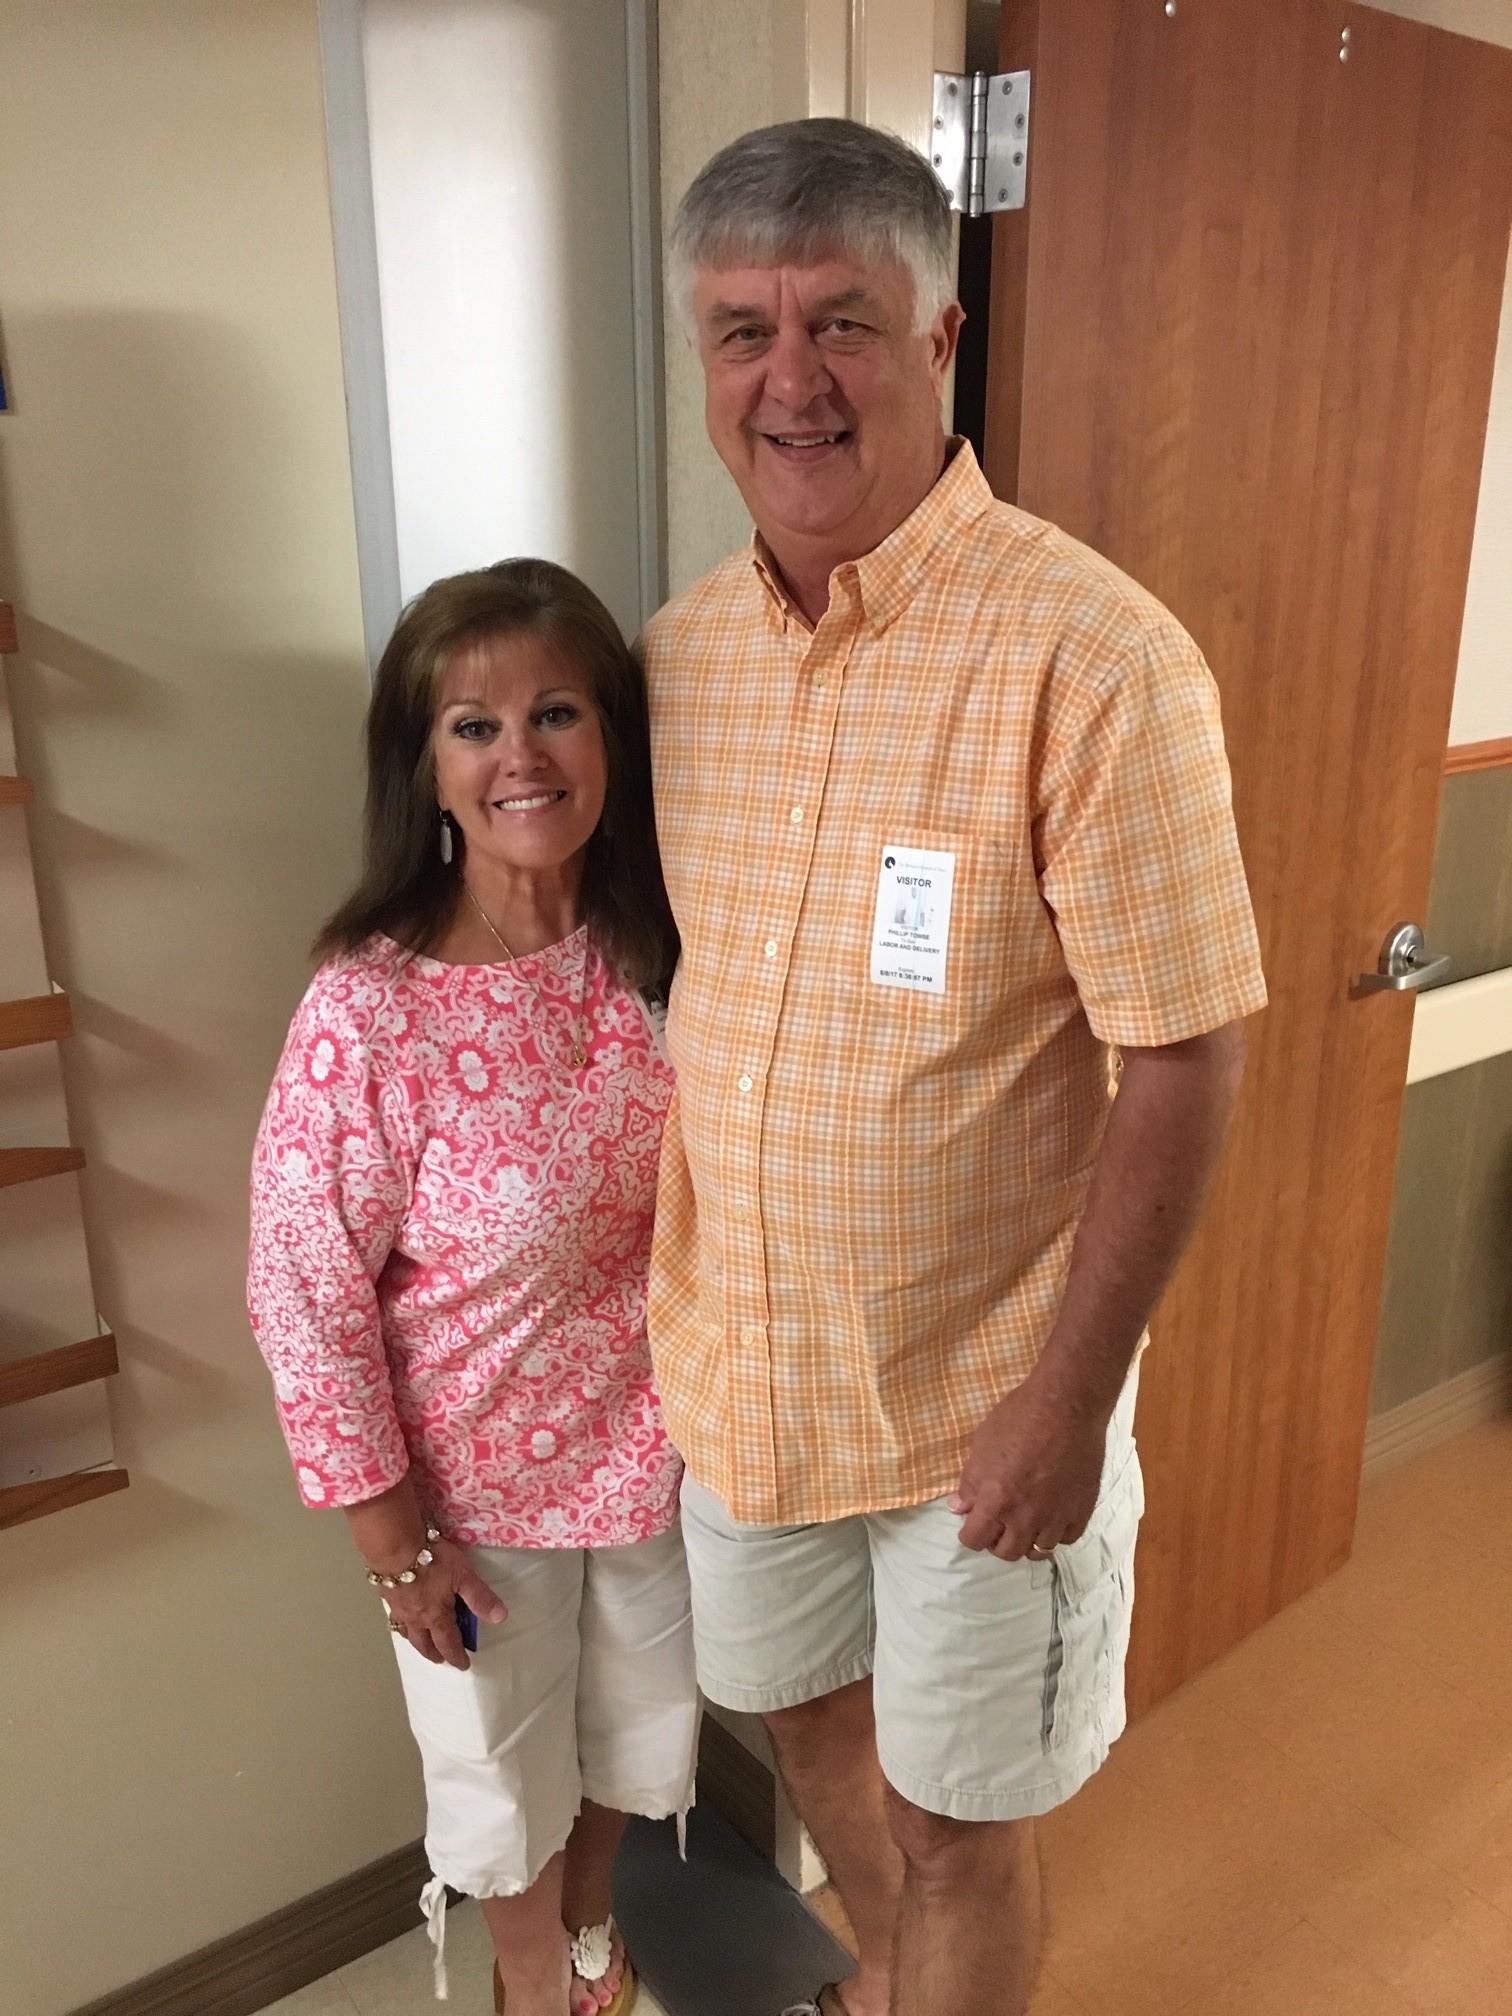 Phil Towse, A Covid-19 Patient Who Received A Convalescent Plasma Transfusion, With His Wife, Cathye Jo.